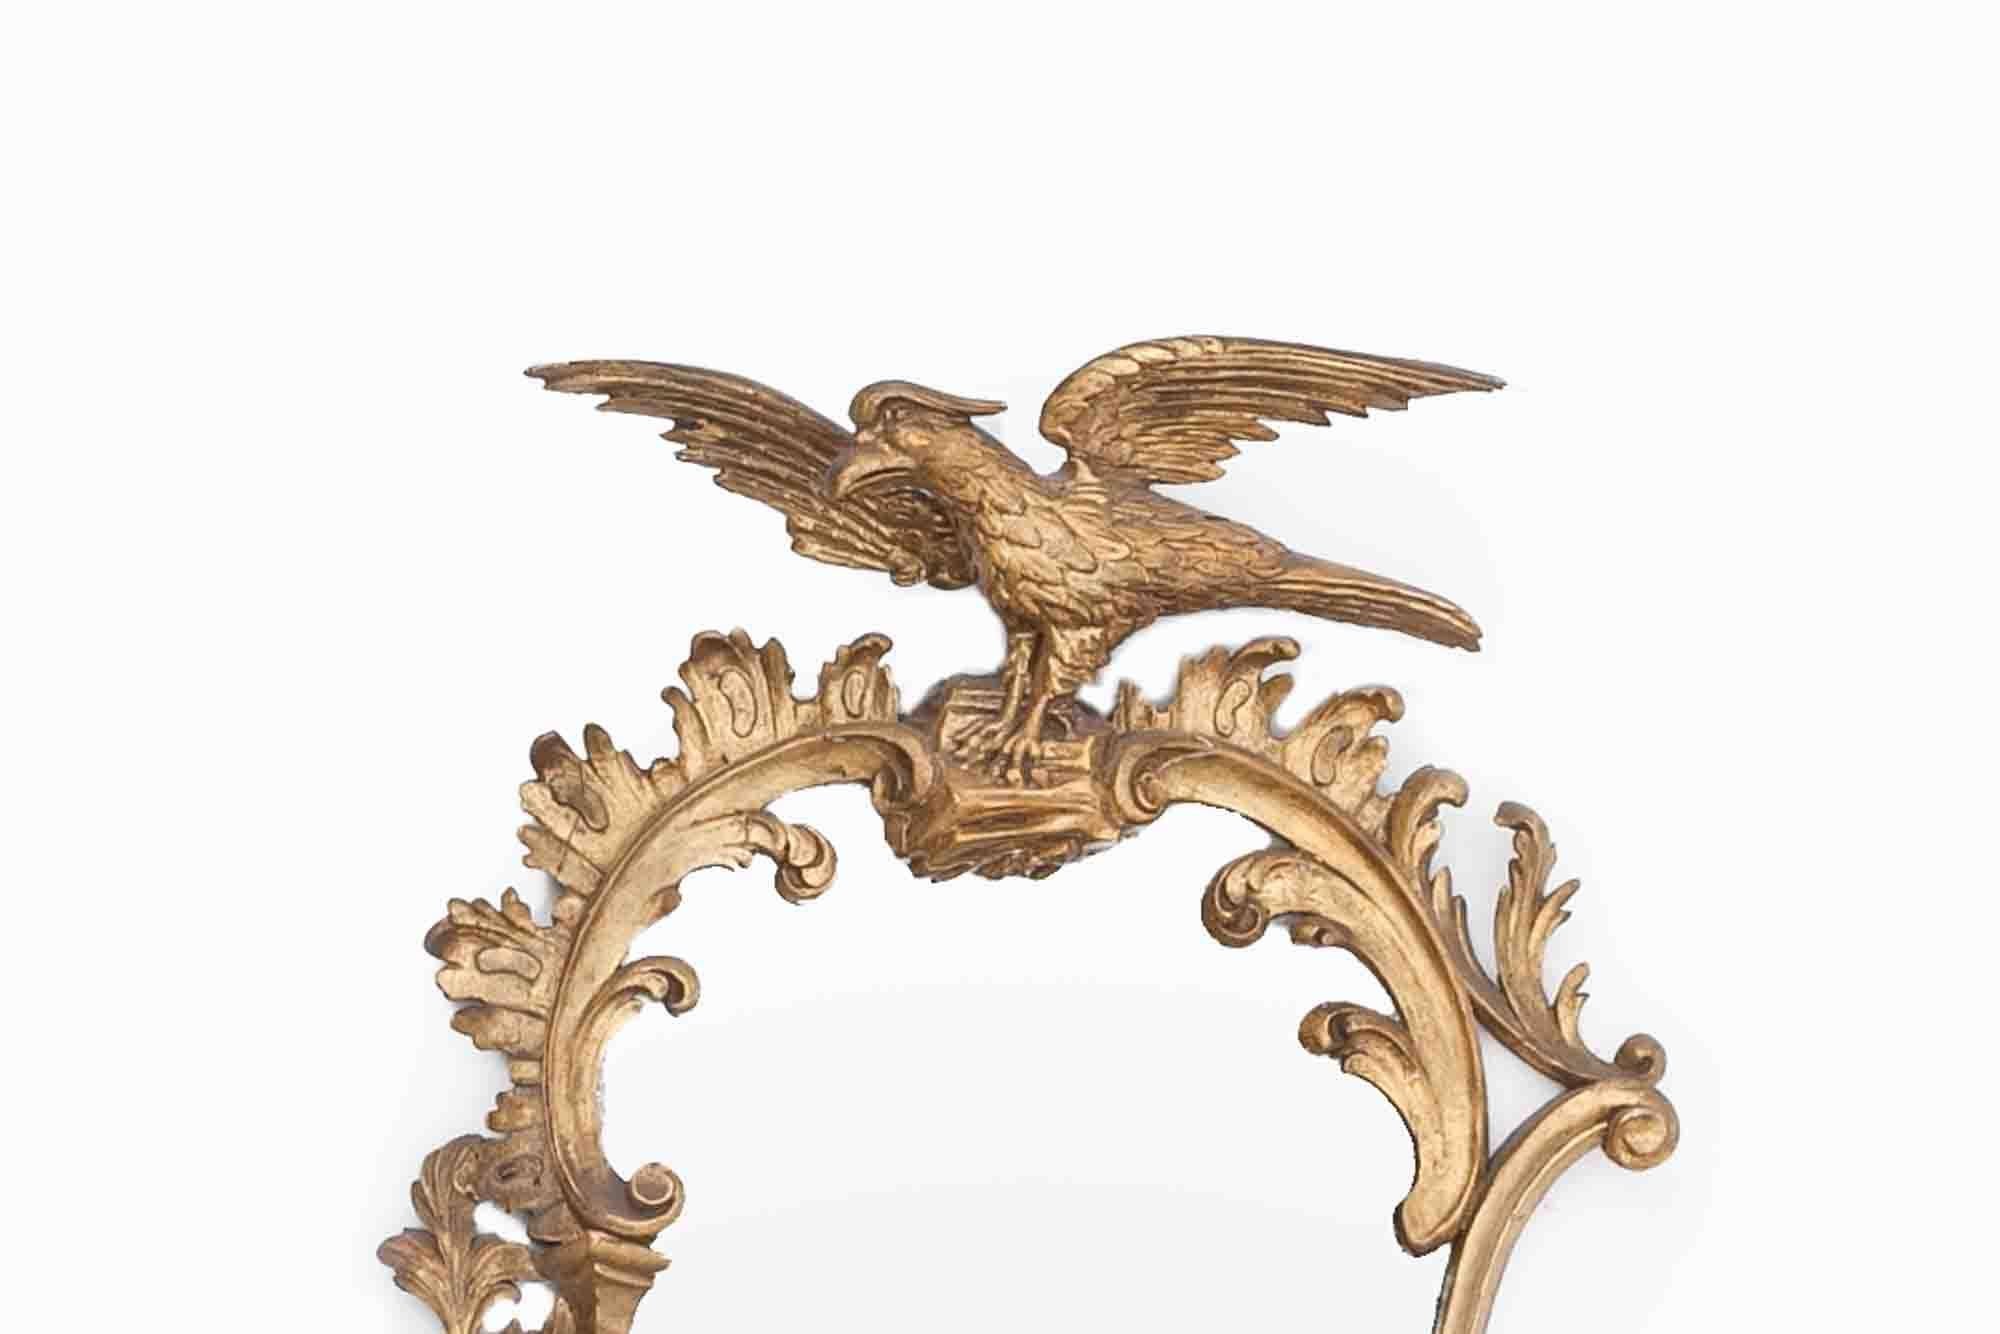 18th Century carved giltwood mirror, the ornate pierced carved asymmetric frame consisting of C-scrolls, rock-work, acanthus foliate. Surmounted by a Ho ho bird.